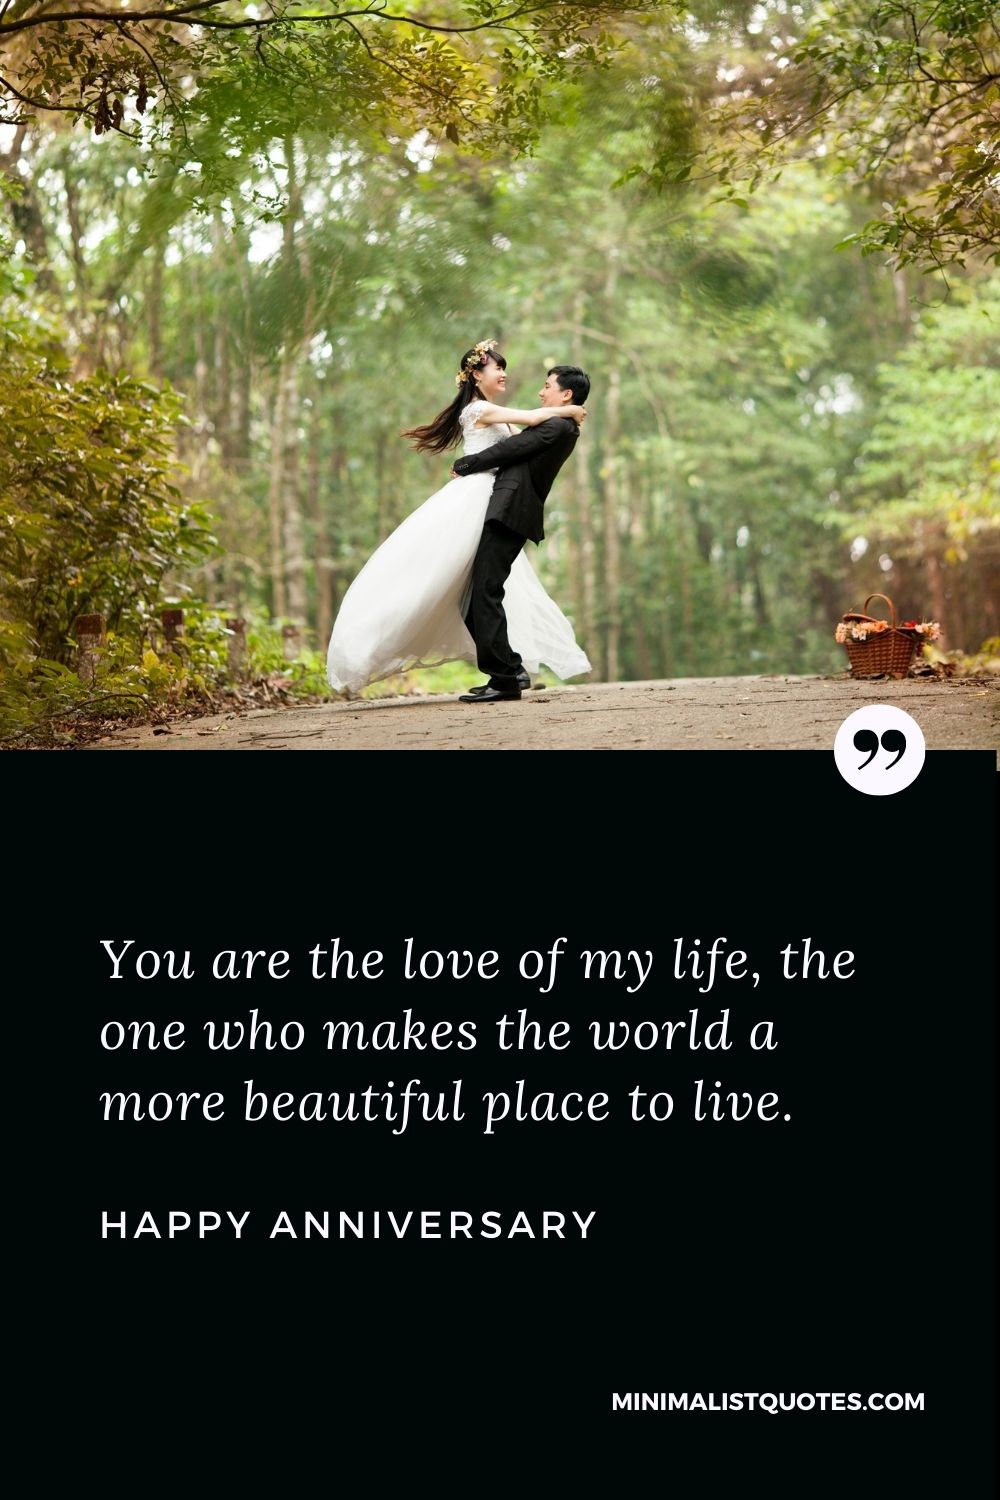 Happy Anniversary Wish - You are the love of my life, the one who makes the world a more beautiful place to live. Happy Anniversary!